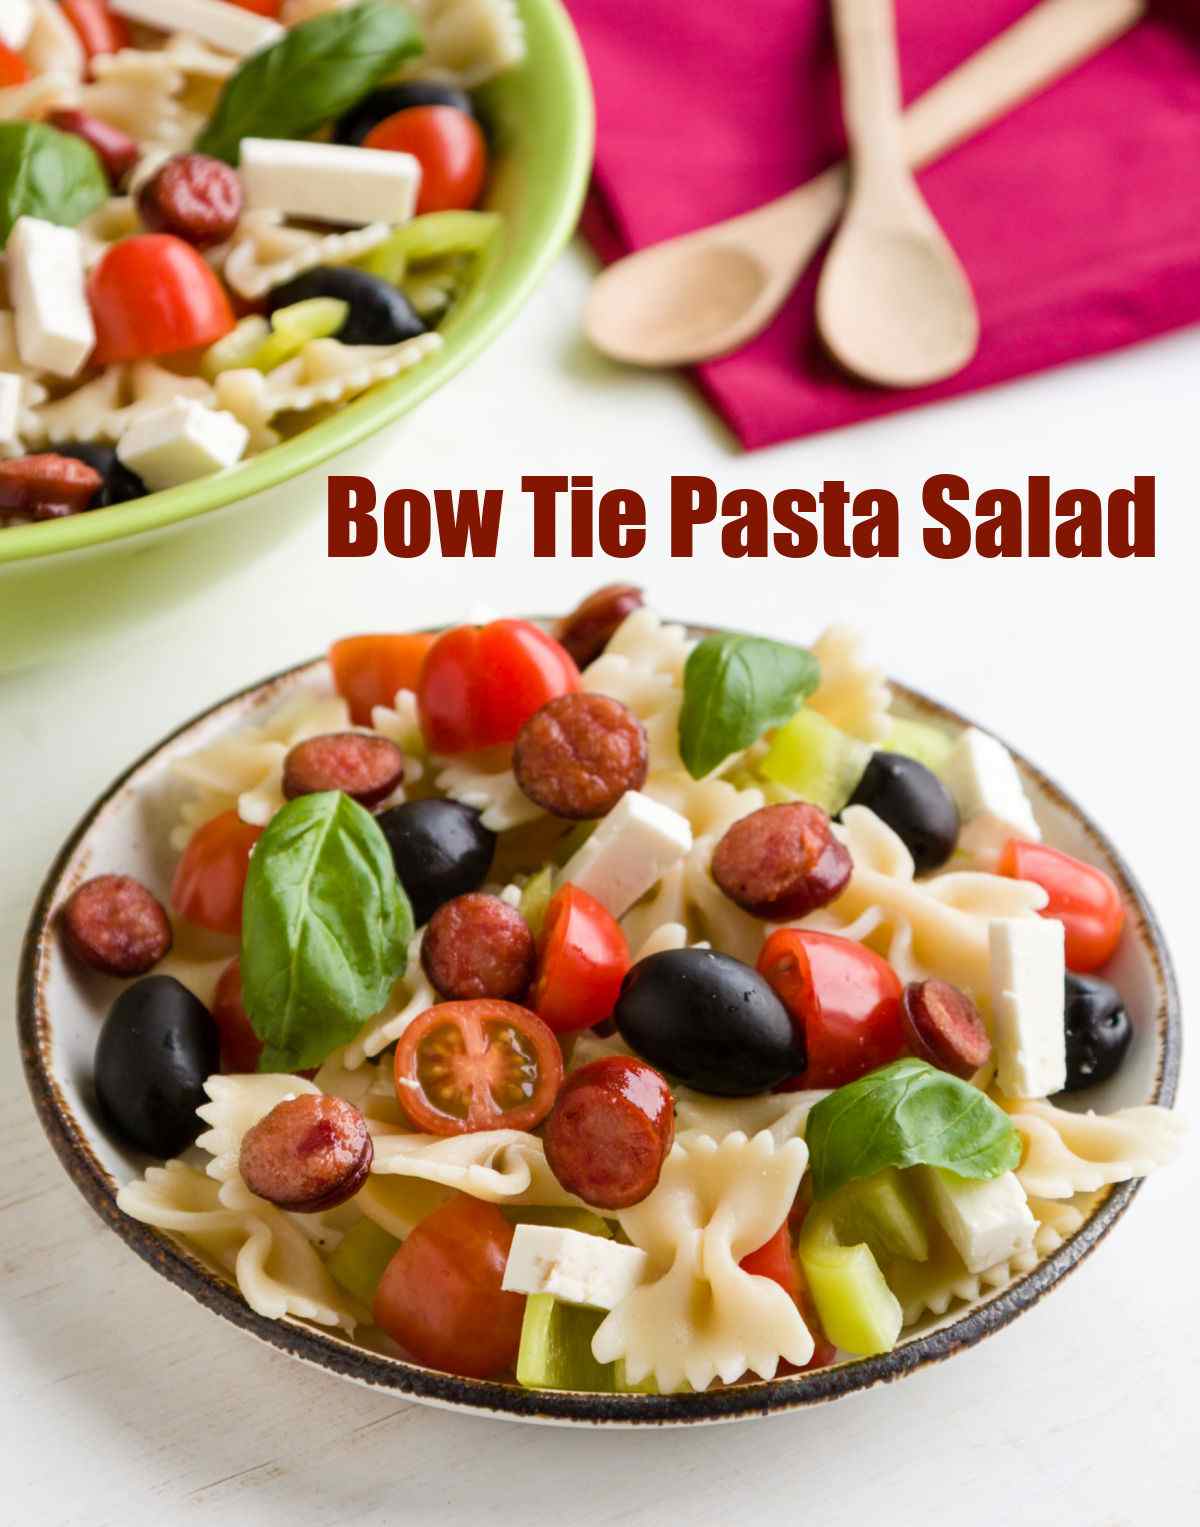 Salad with farfelle pasta, olives, basil, mozzarella and tomatoes and words Bow Tie Pasta Salad.